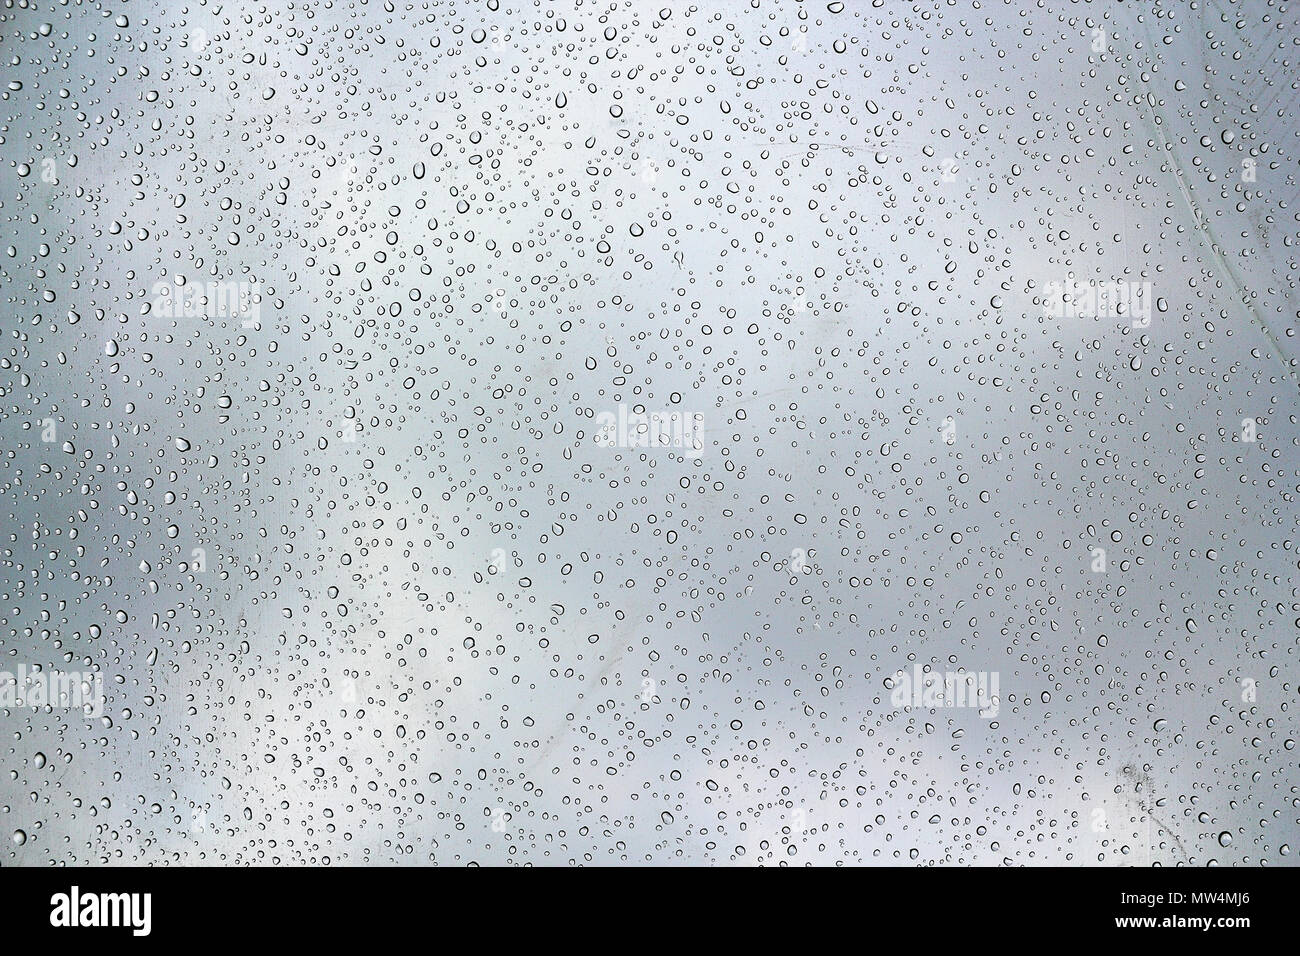 abstract view of water droplets on glass surface in a rainy day Stock Photo